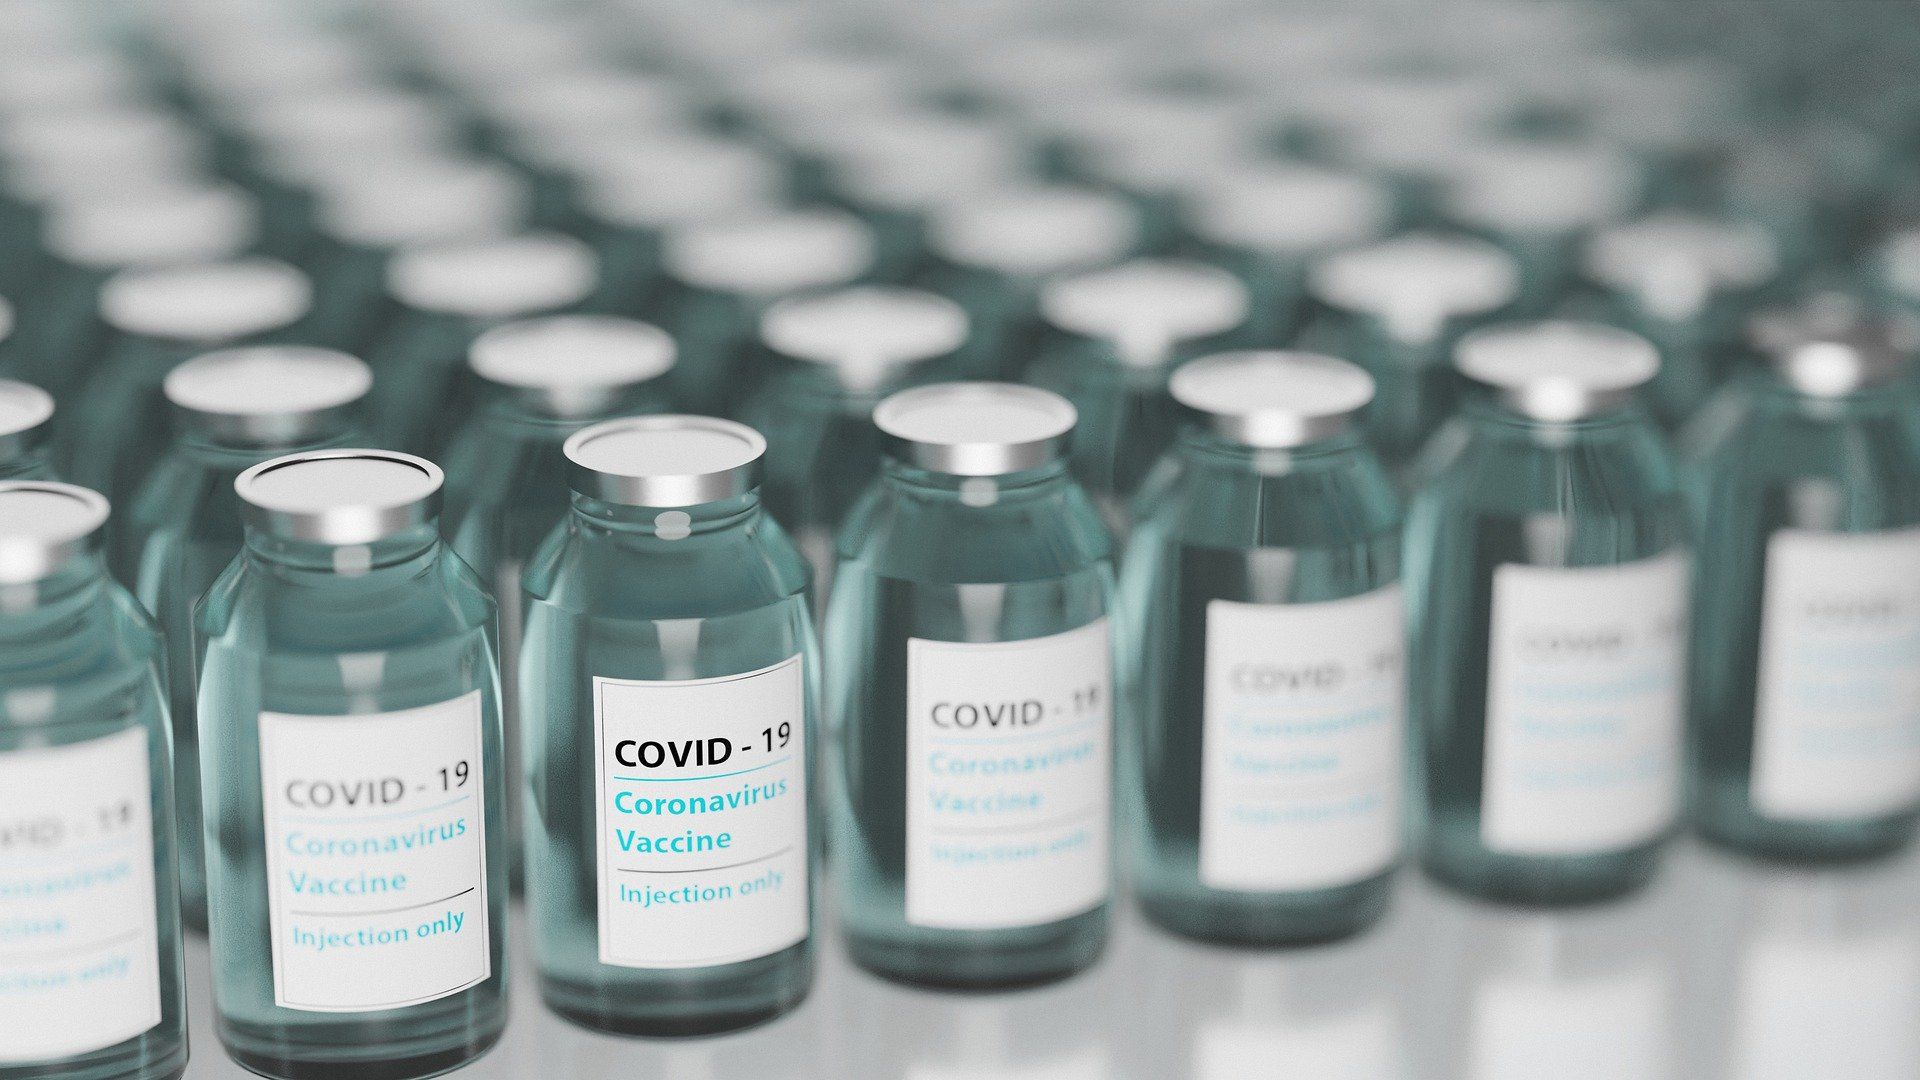 Covovax trials begin, hope to launch vaccine by Sept 2021: Adar Poonawalla